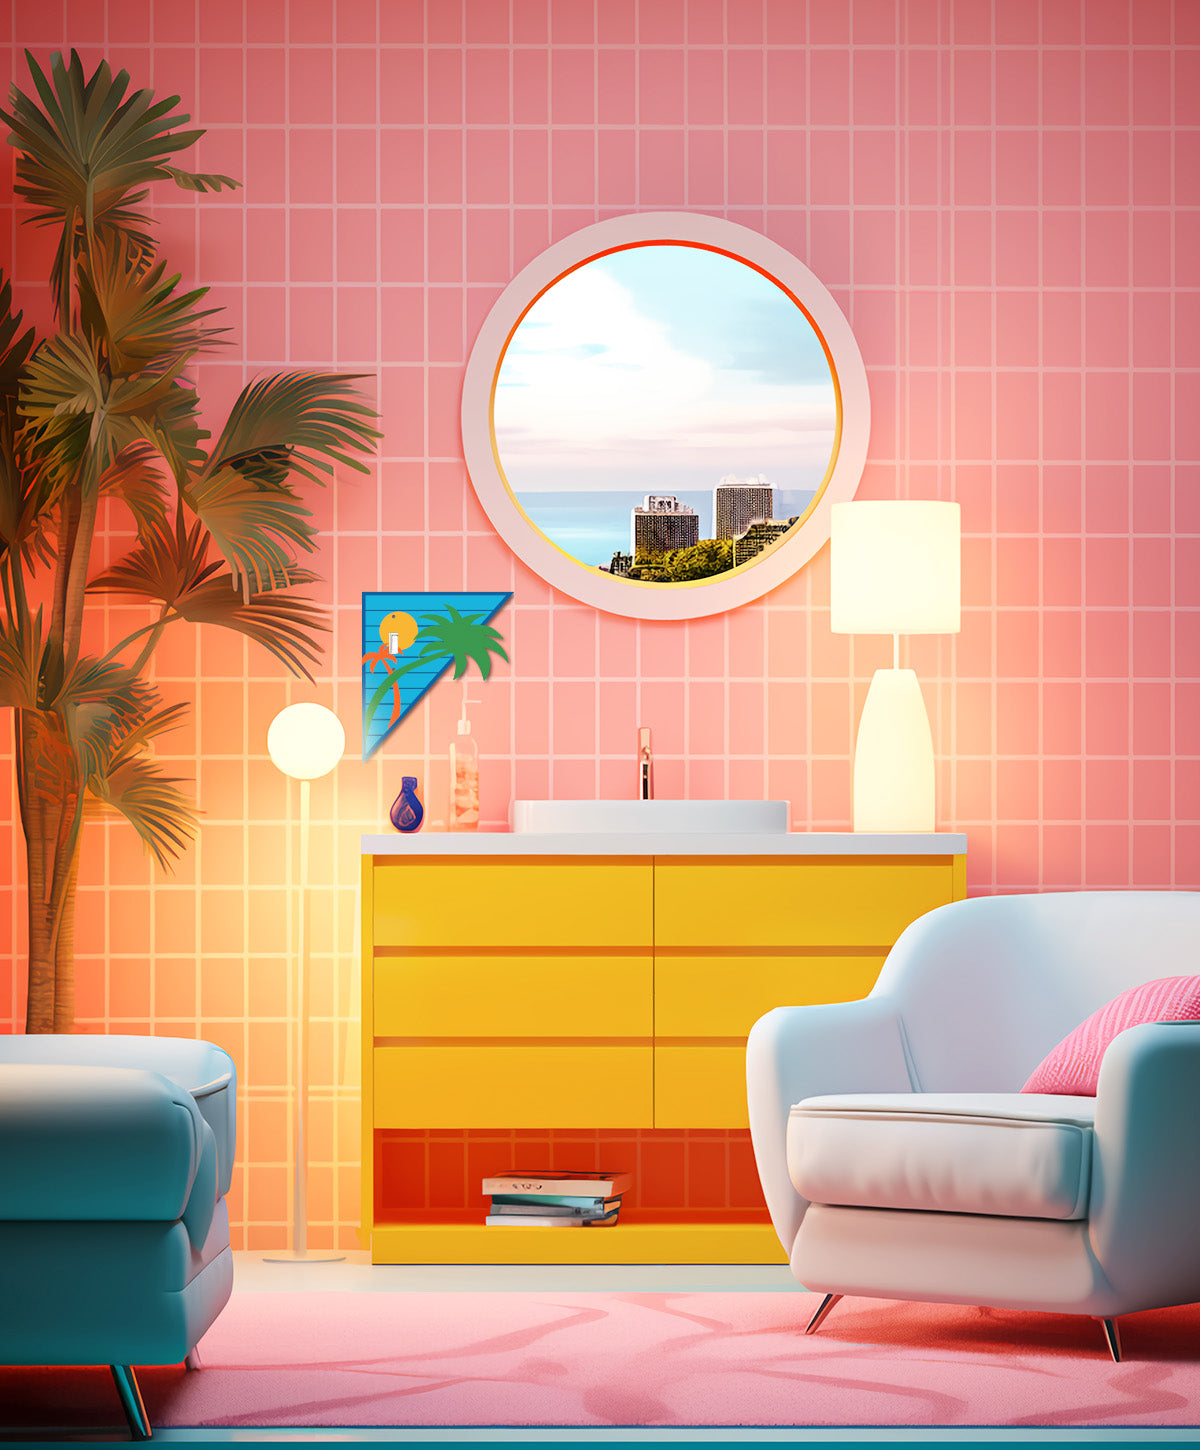 Vice City Light Switch Cover